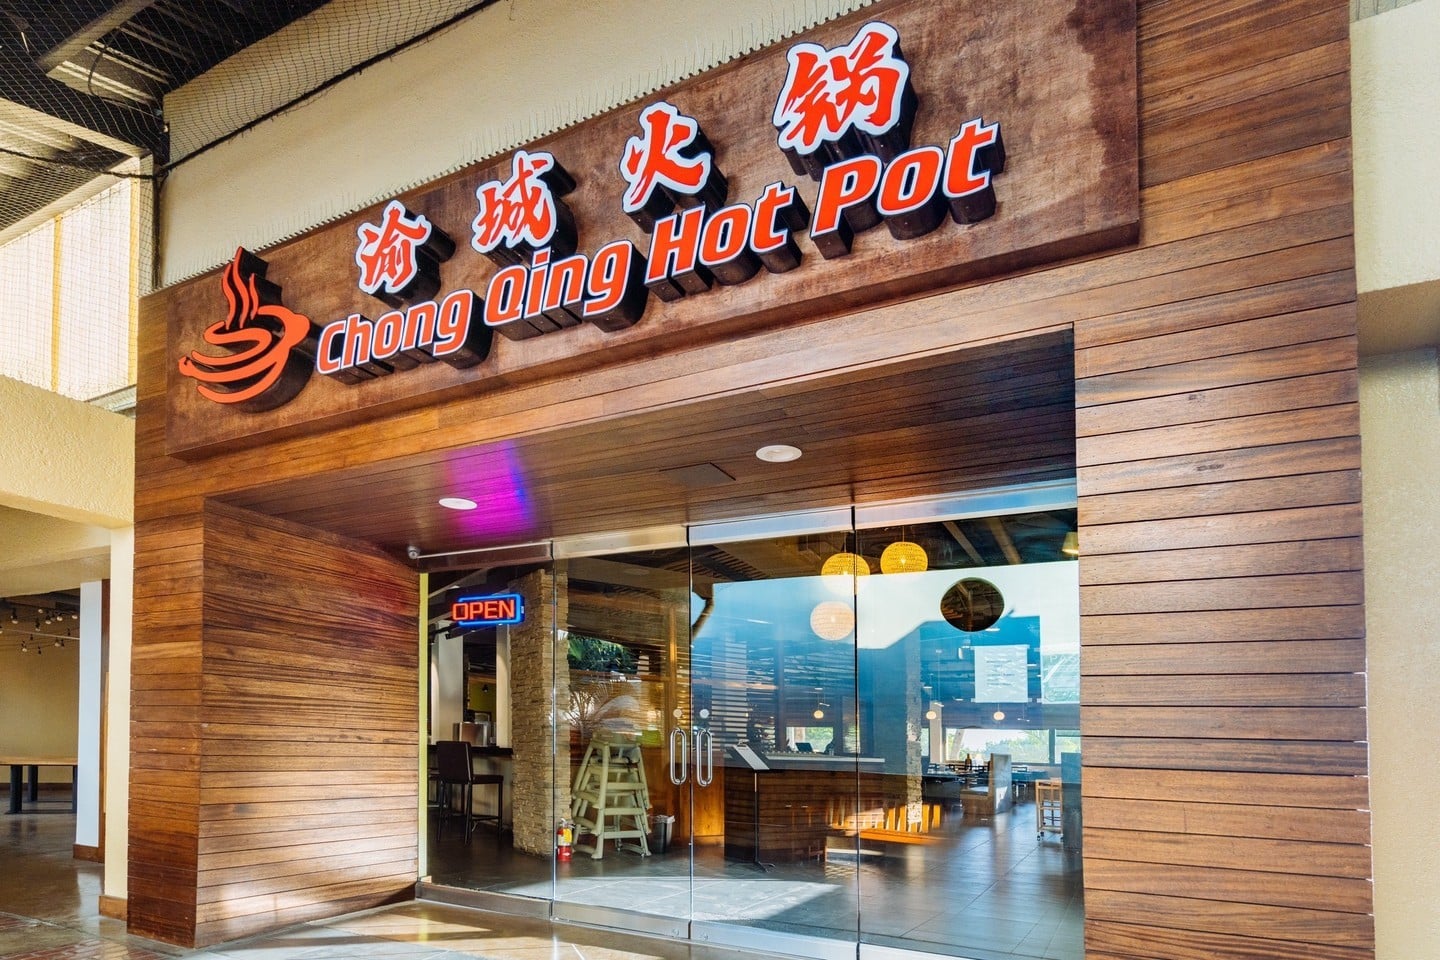 Welcome to the neighborhood Chong Qing Hot Pot! Now open at Ward Centre, this new eatery is the perfect place to gather with friends and family for an interactive all-you-can-eat meal filled with cozy broth, bold dipping sauces and good conversation.